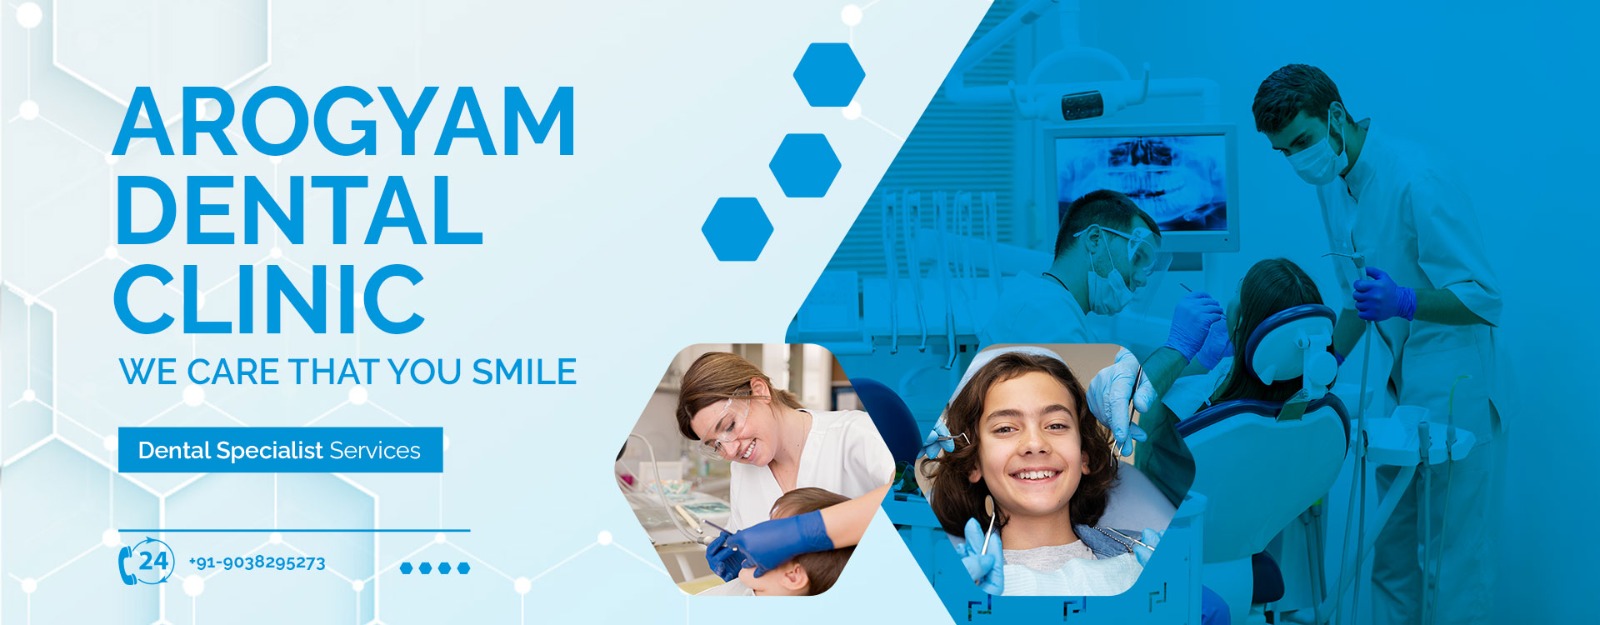 Arogyam Multi-speciality Dental Clinic and Orthodontic Braces Center